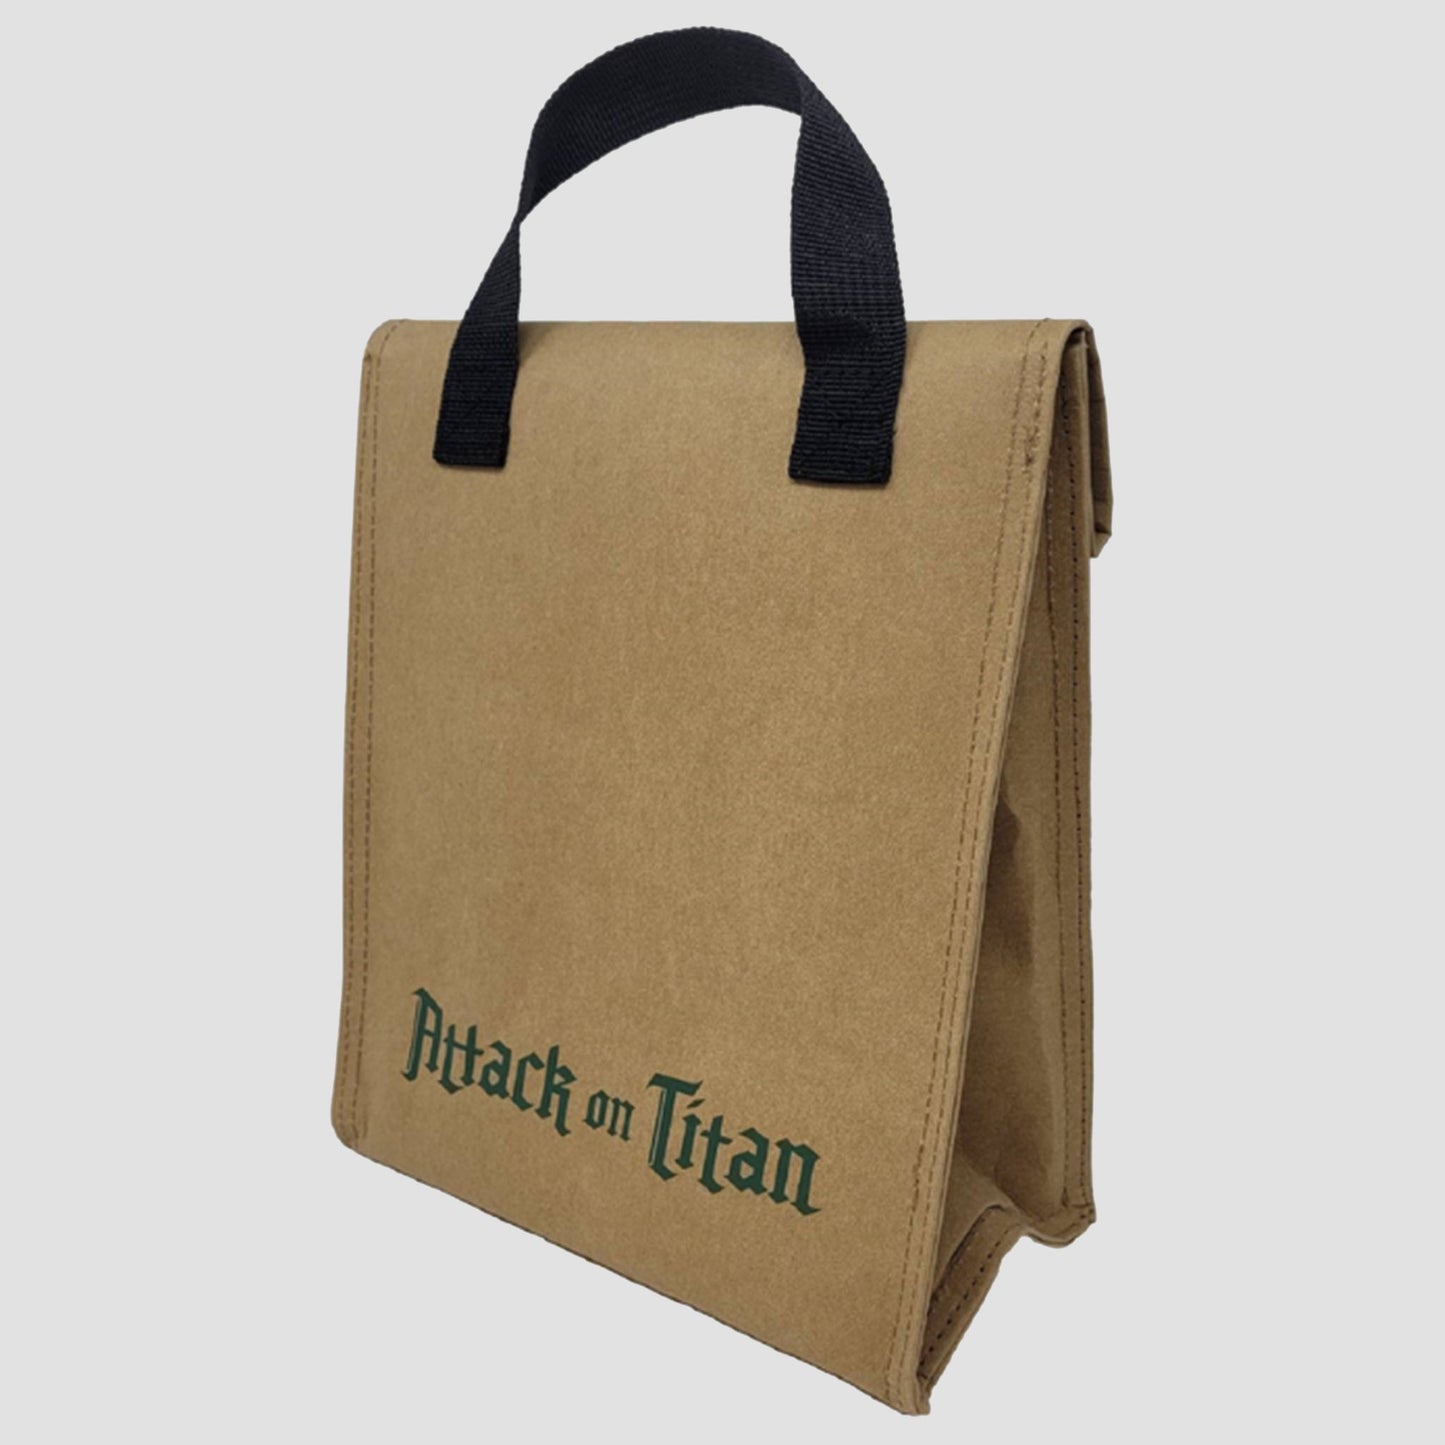 Scout Regiment (Attack on Titan) Insulated Lunch Tote Bag